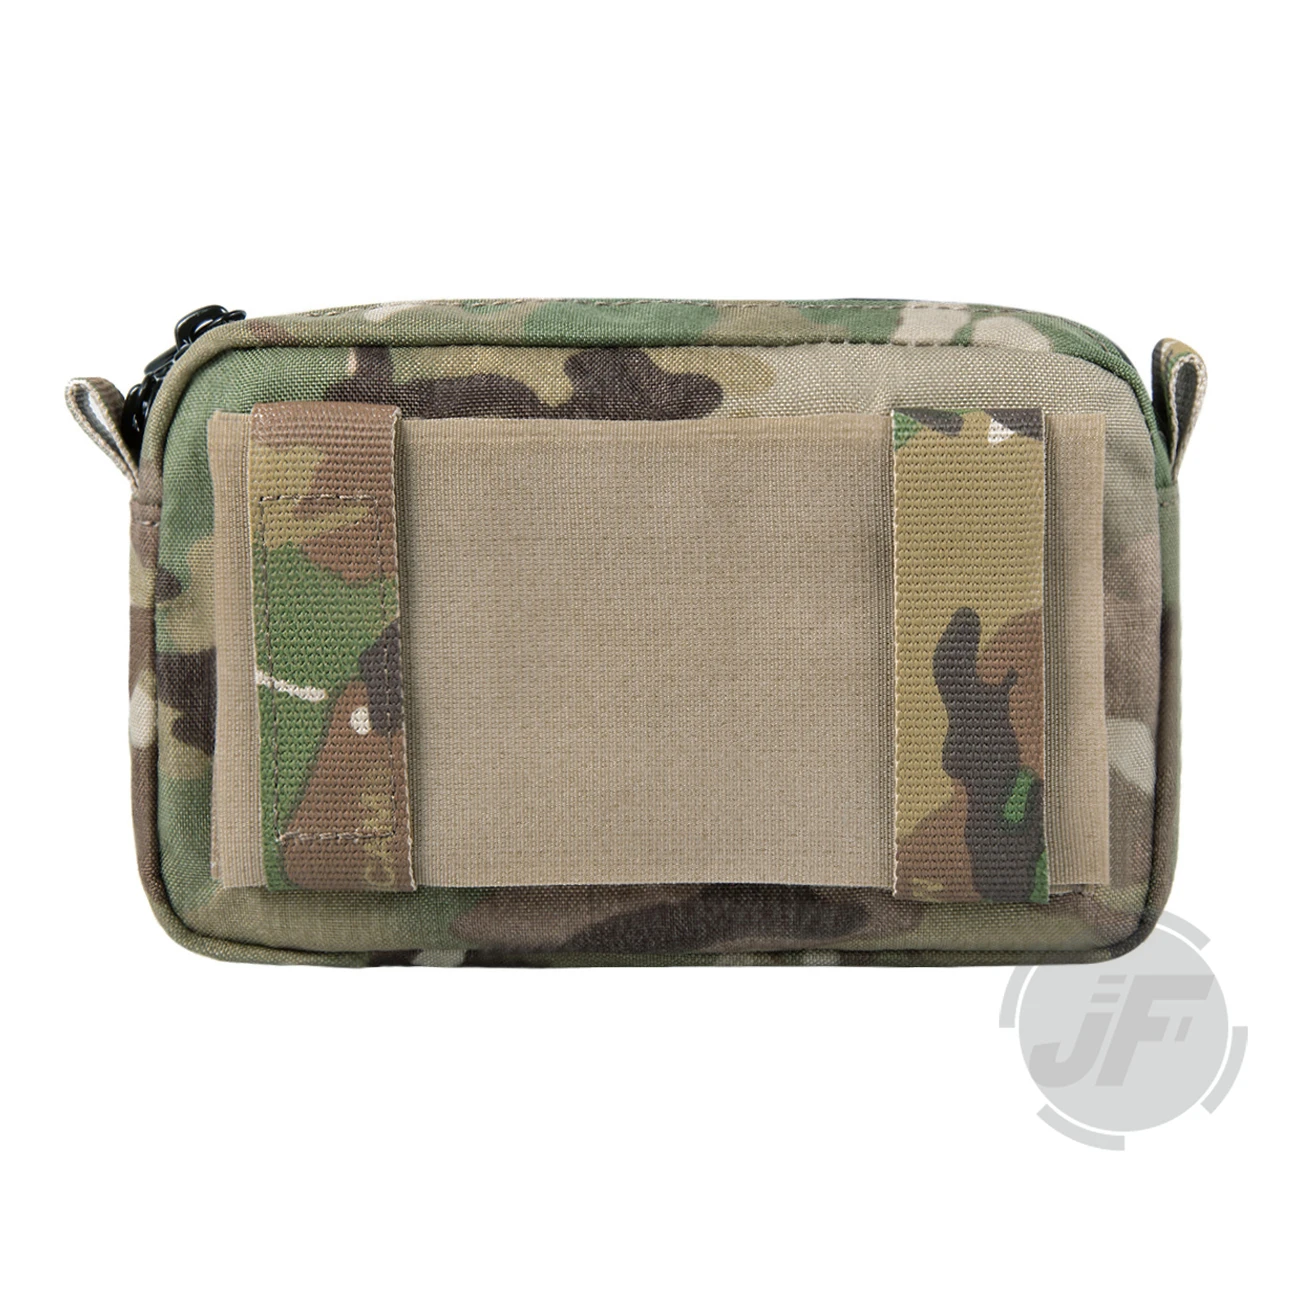 Emerson Tactical Invader Utility Pouch 7"x4" Lightweight Flat Pocket Hook & Loop 